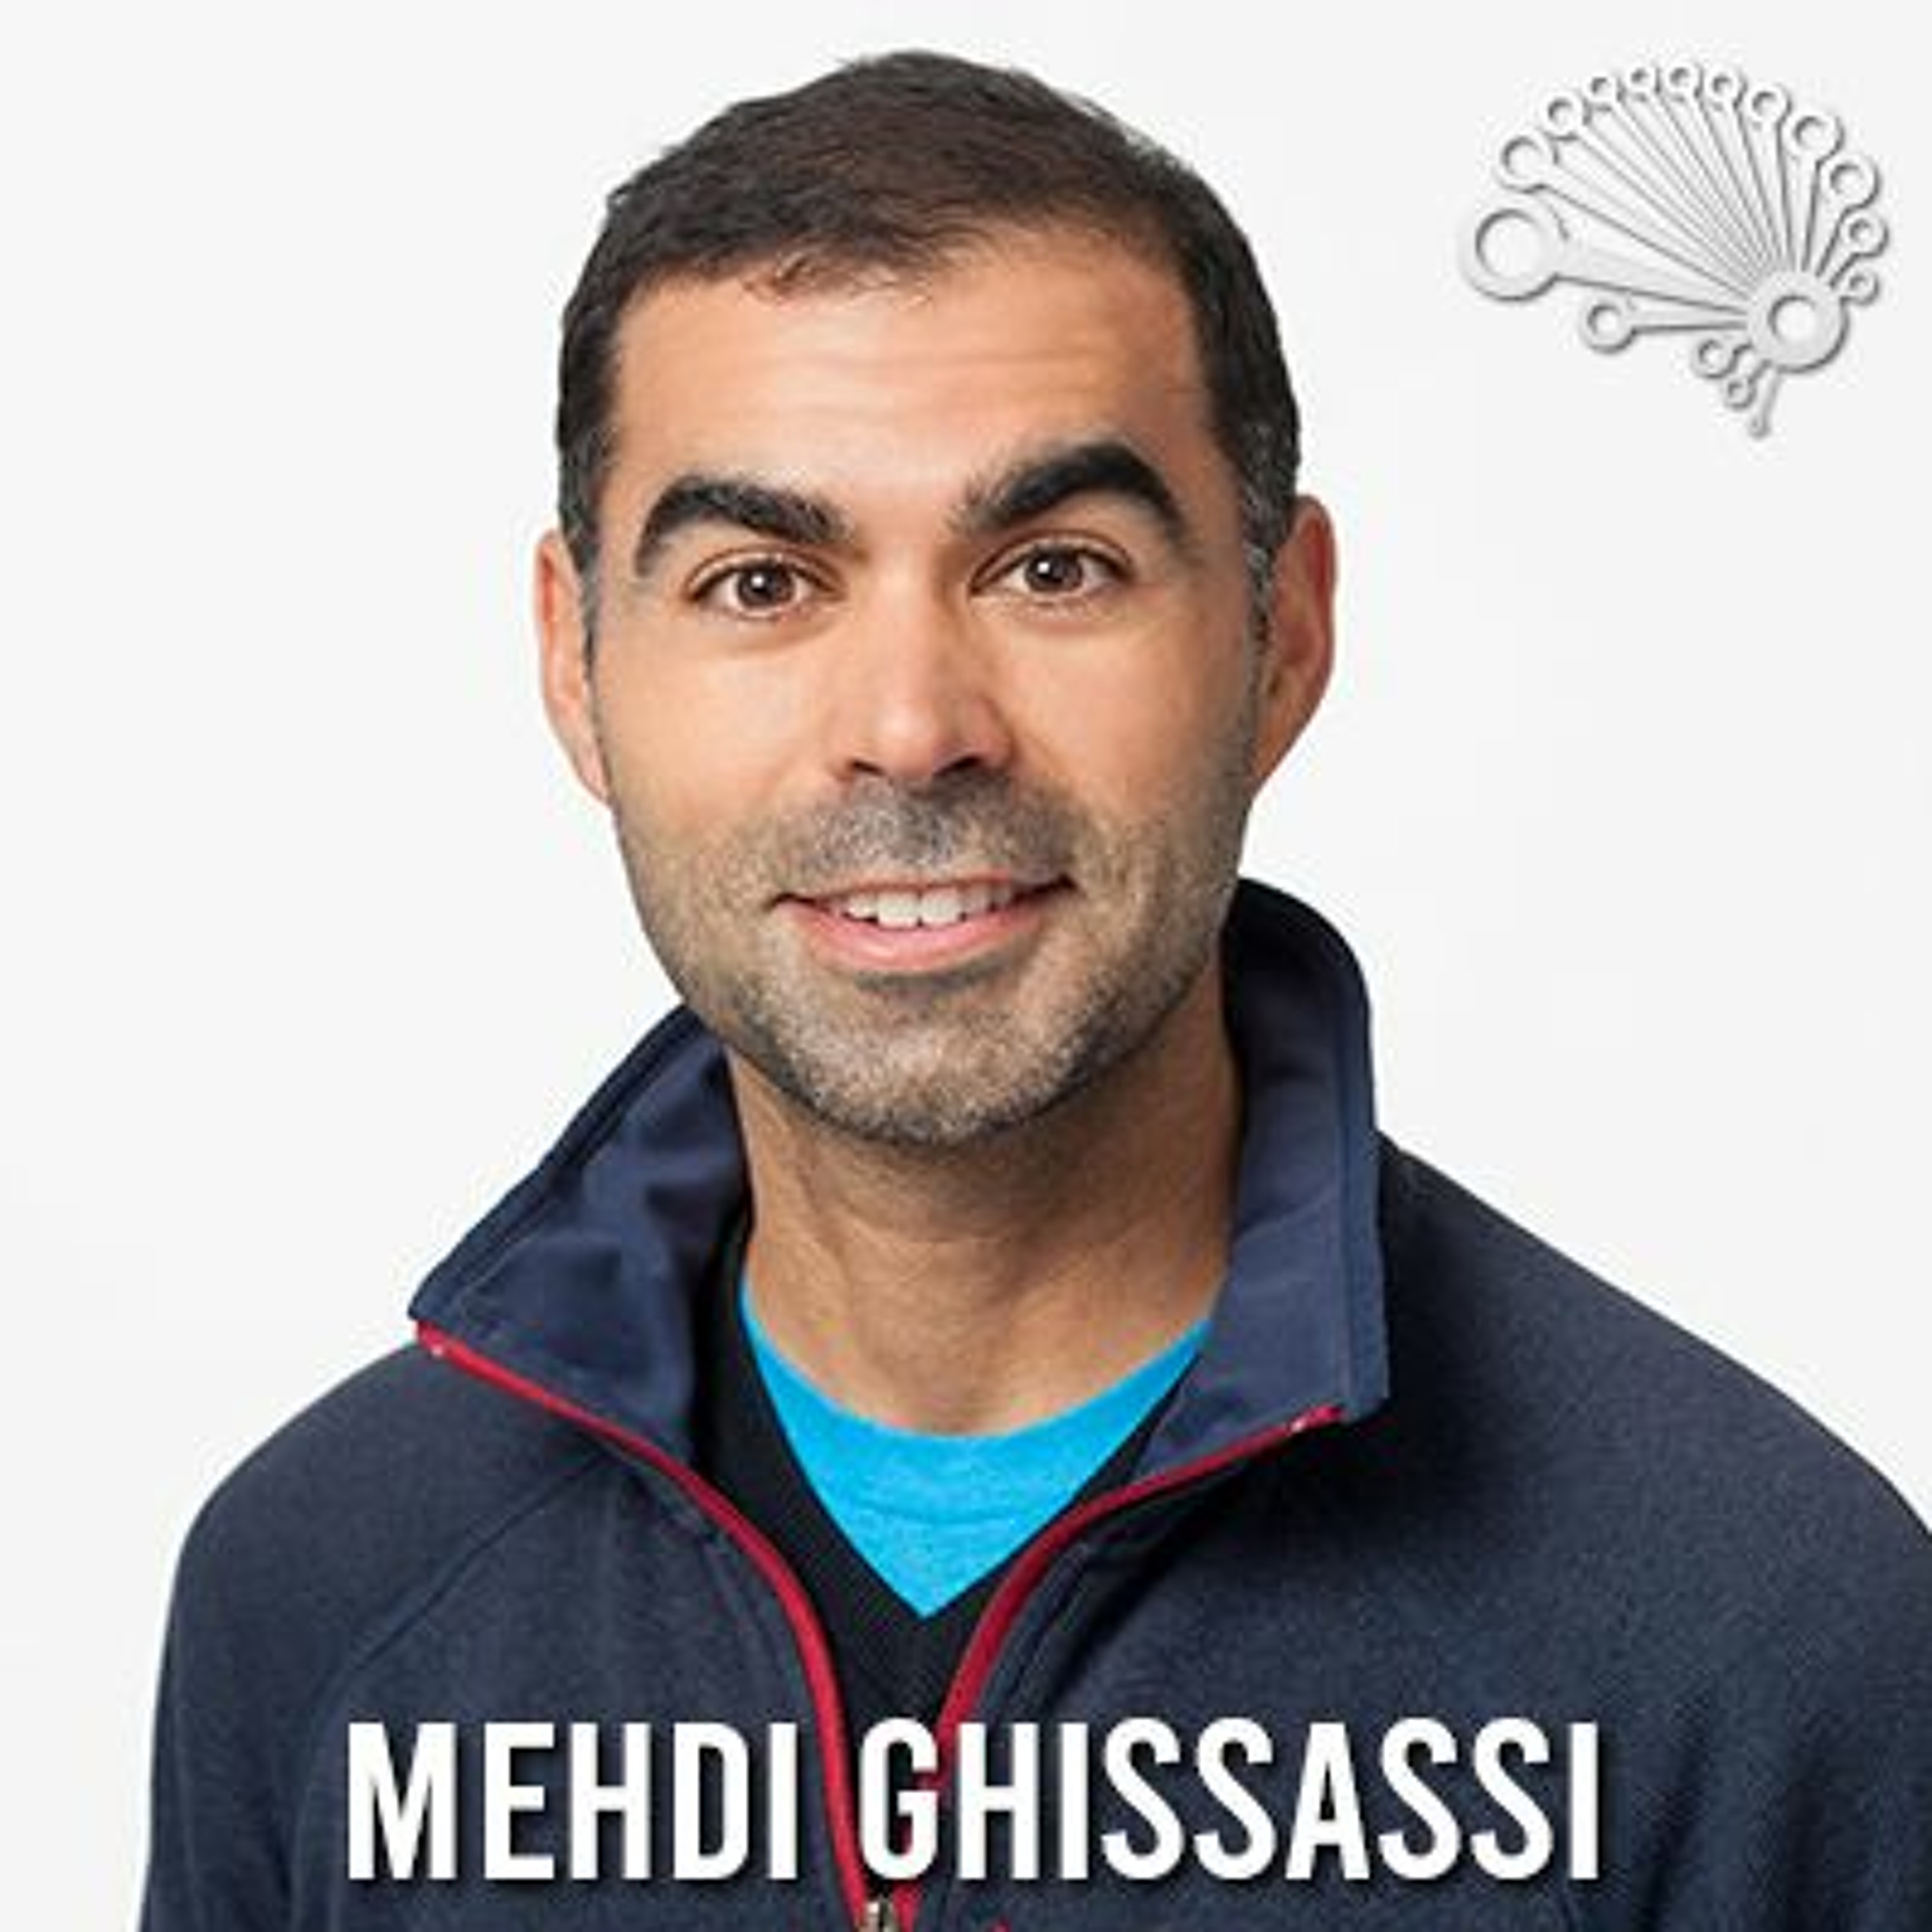 735: A.I. Product Management, with Google DeepMind’s Head of Product, Mehdi Ghissassi